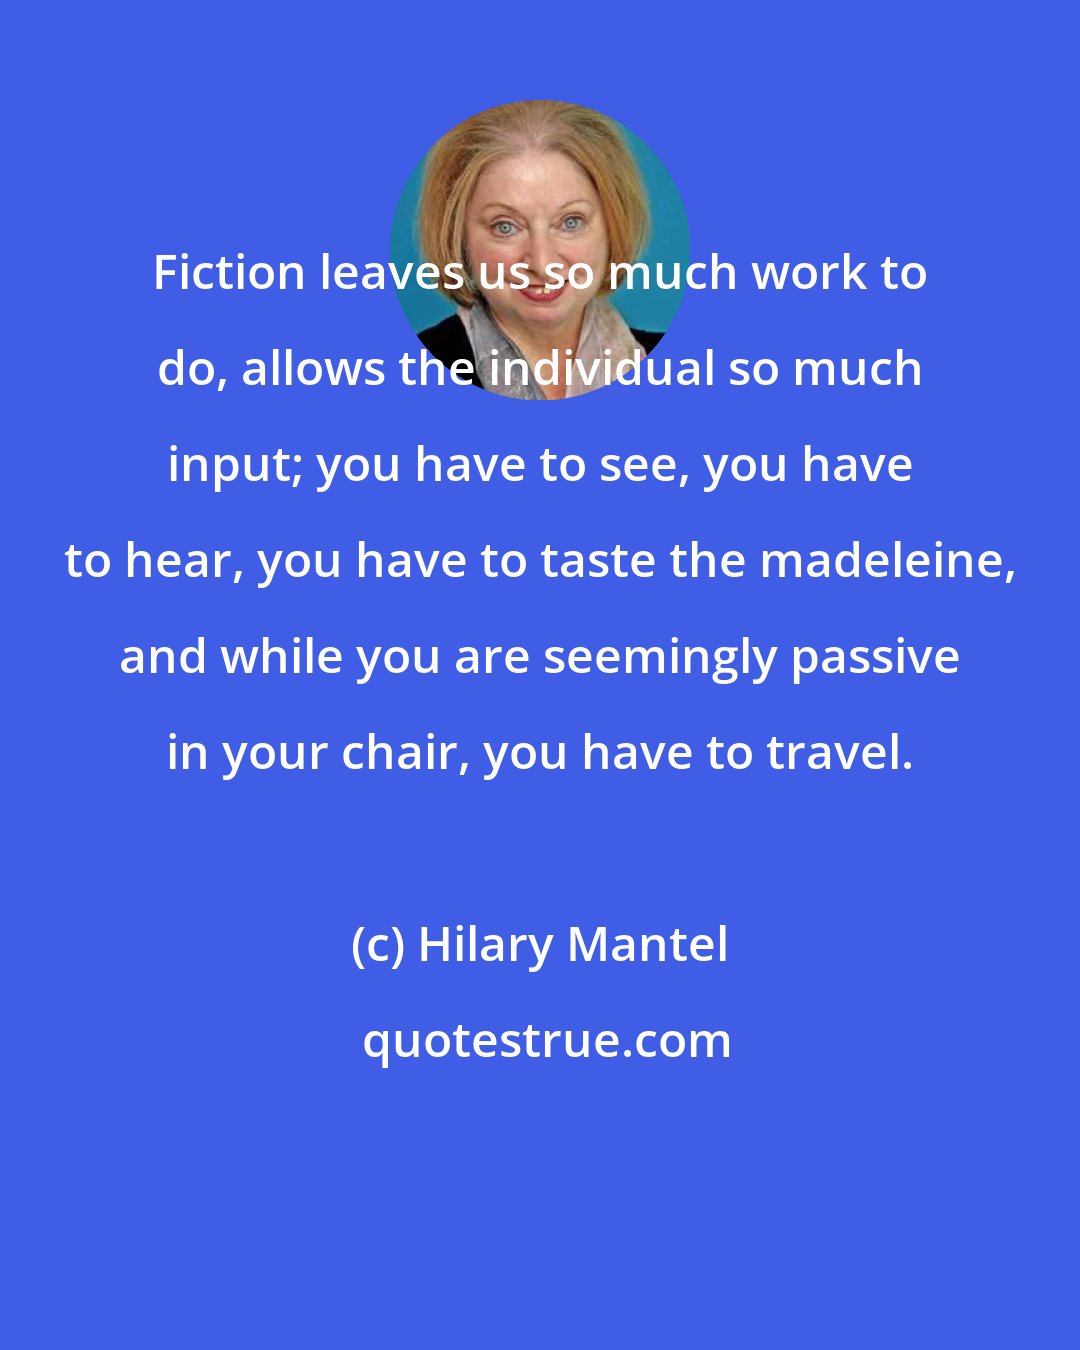 Hilary Mantel: Fiction leaves us so much work to do, allows the individual so much input; you have to see, you have to hear, you have to taste the madeleine, and while you are seemingly passive in your chair, you have to travel.